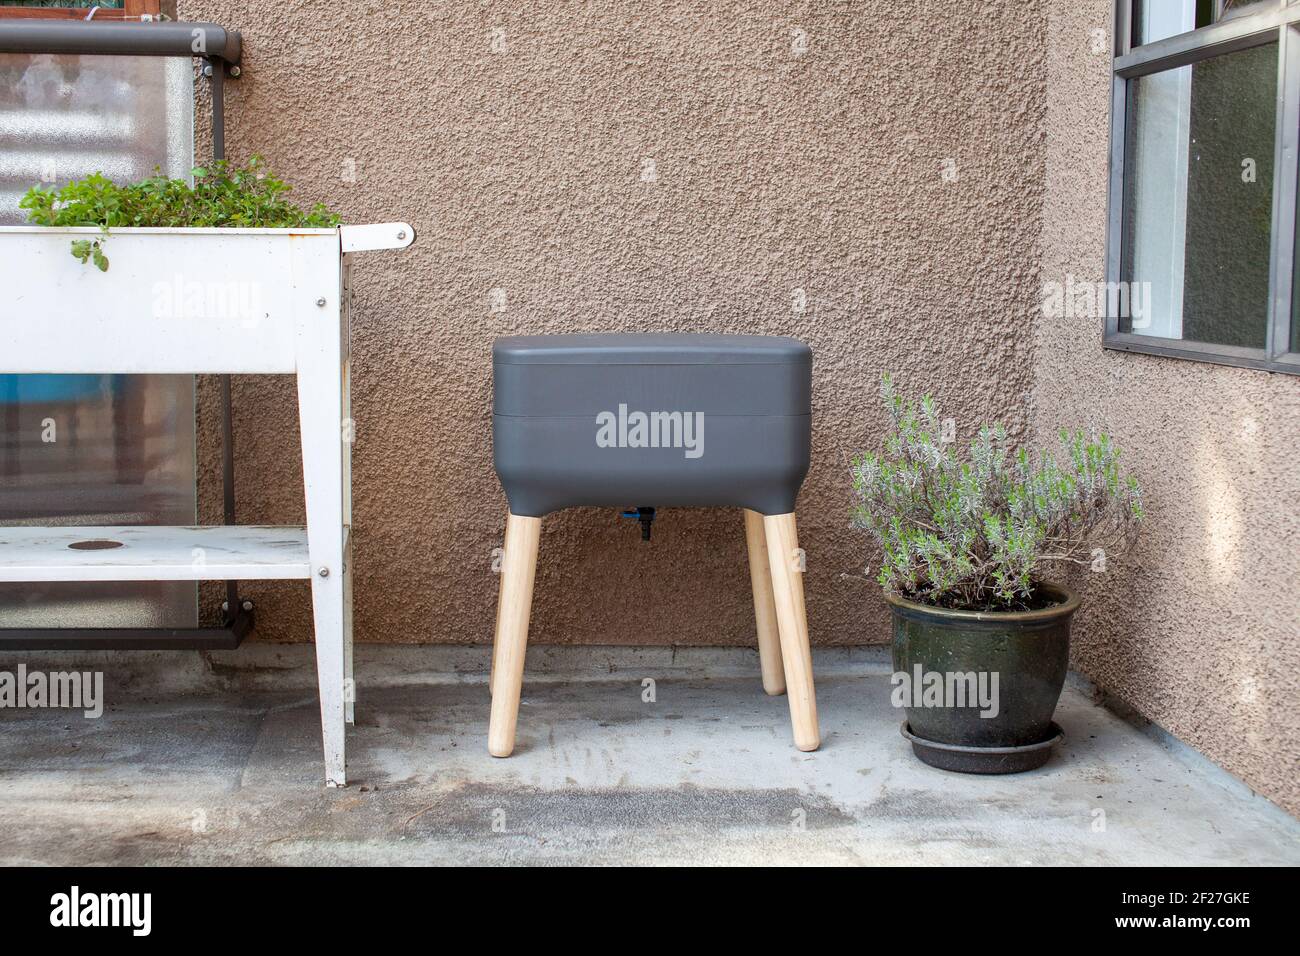 A vermicomposting system (worm composter) sits on an apartment balcony with other patio planters. Worms eat food scraps and produce worm castings and Stock Photo